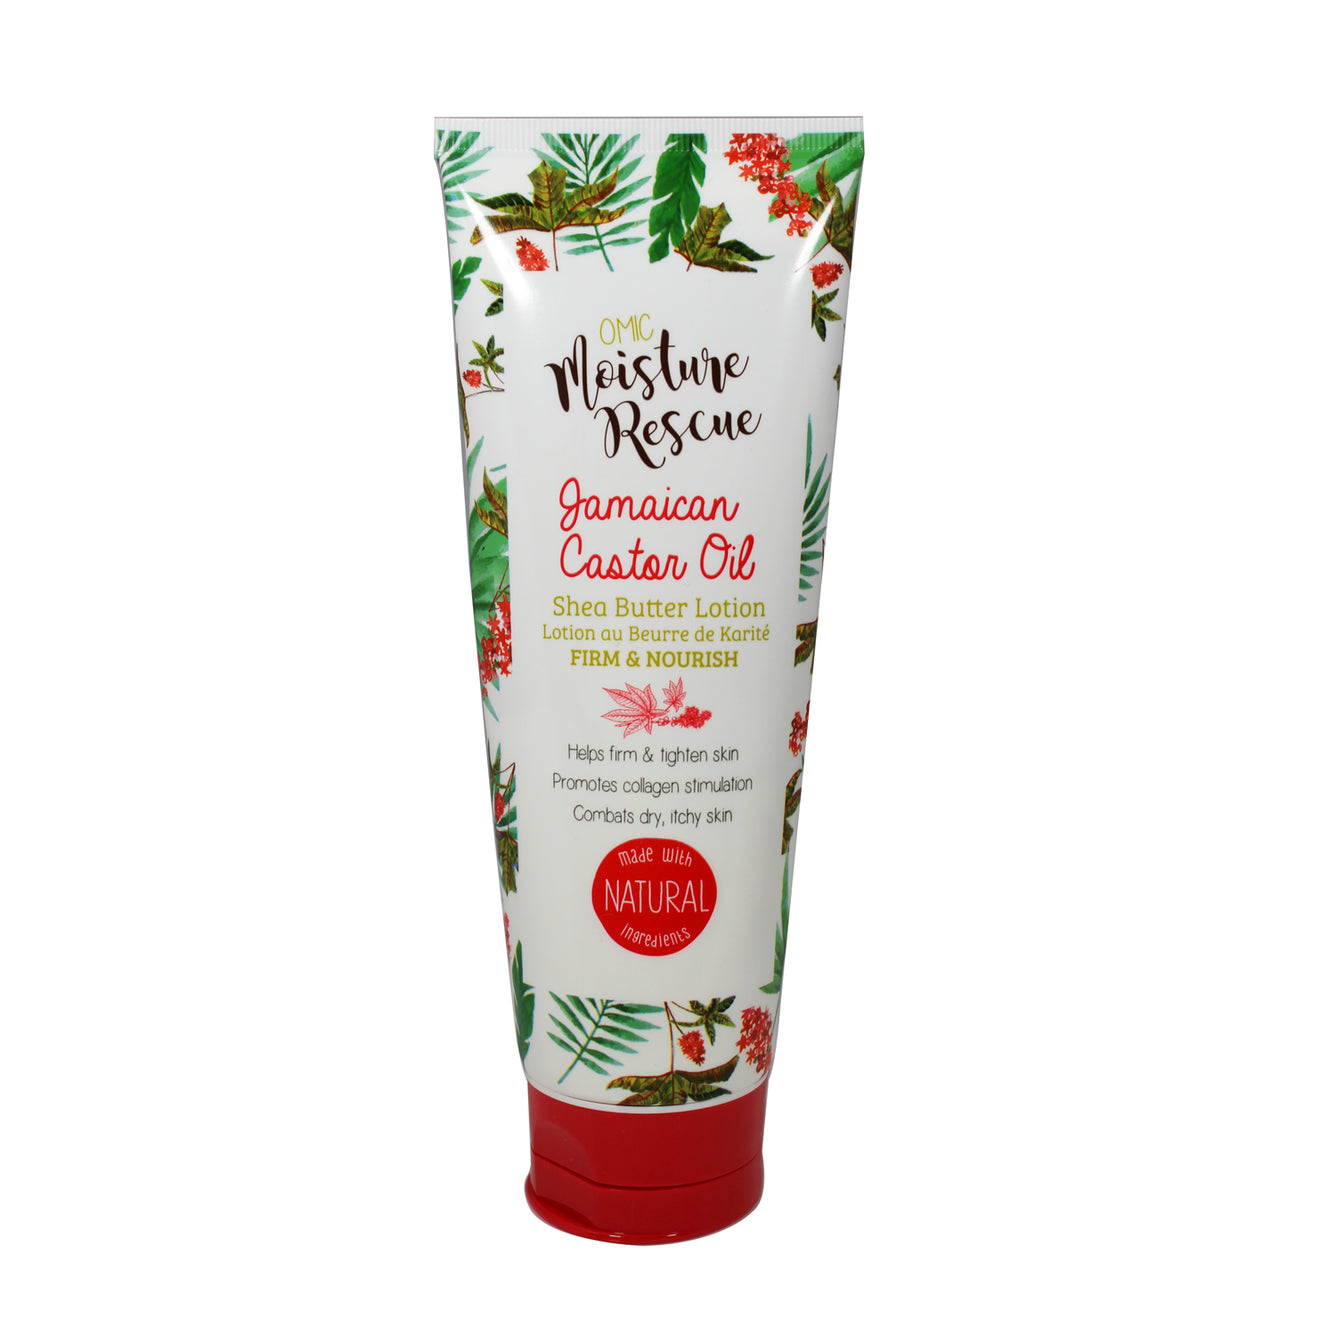 Moisture Rescue Shea Butter Lotion Tube  with Jamaican Castor Oil Mitchell Brands - Mitchell Brands - Skin Lightening, Skin Brightening, Fade Dark Spots, Shea Butter, Hair Growth Products